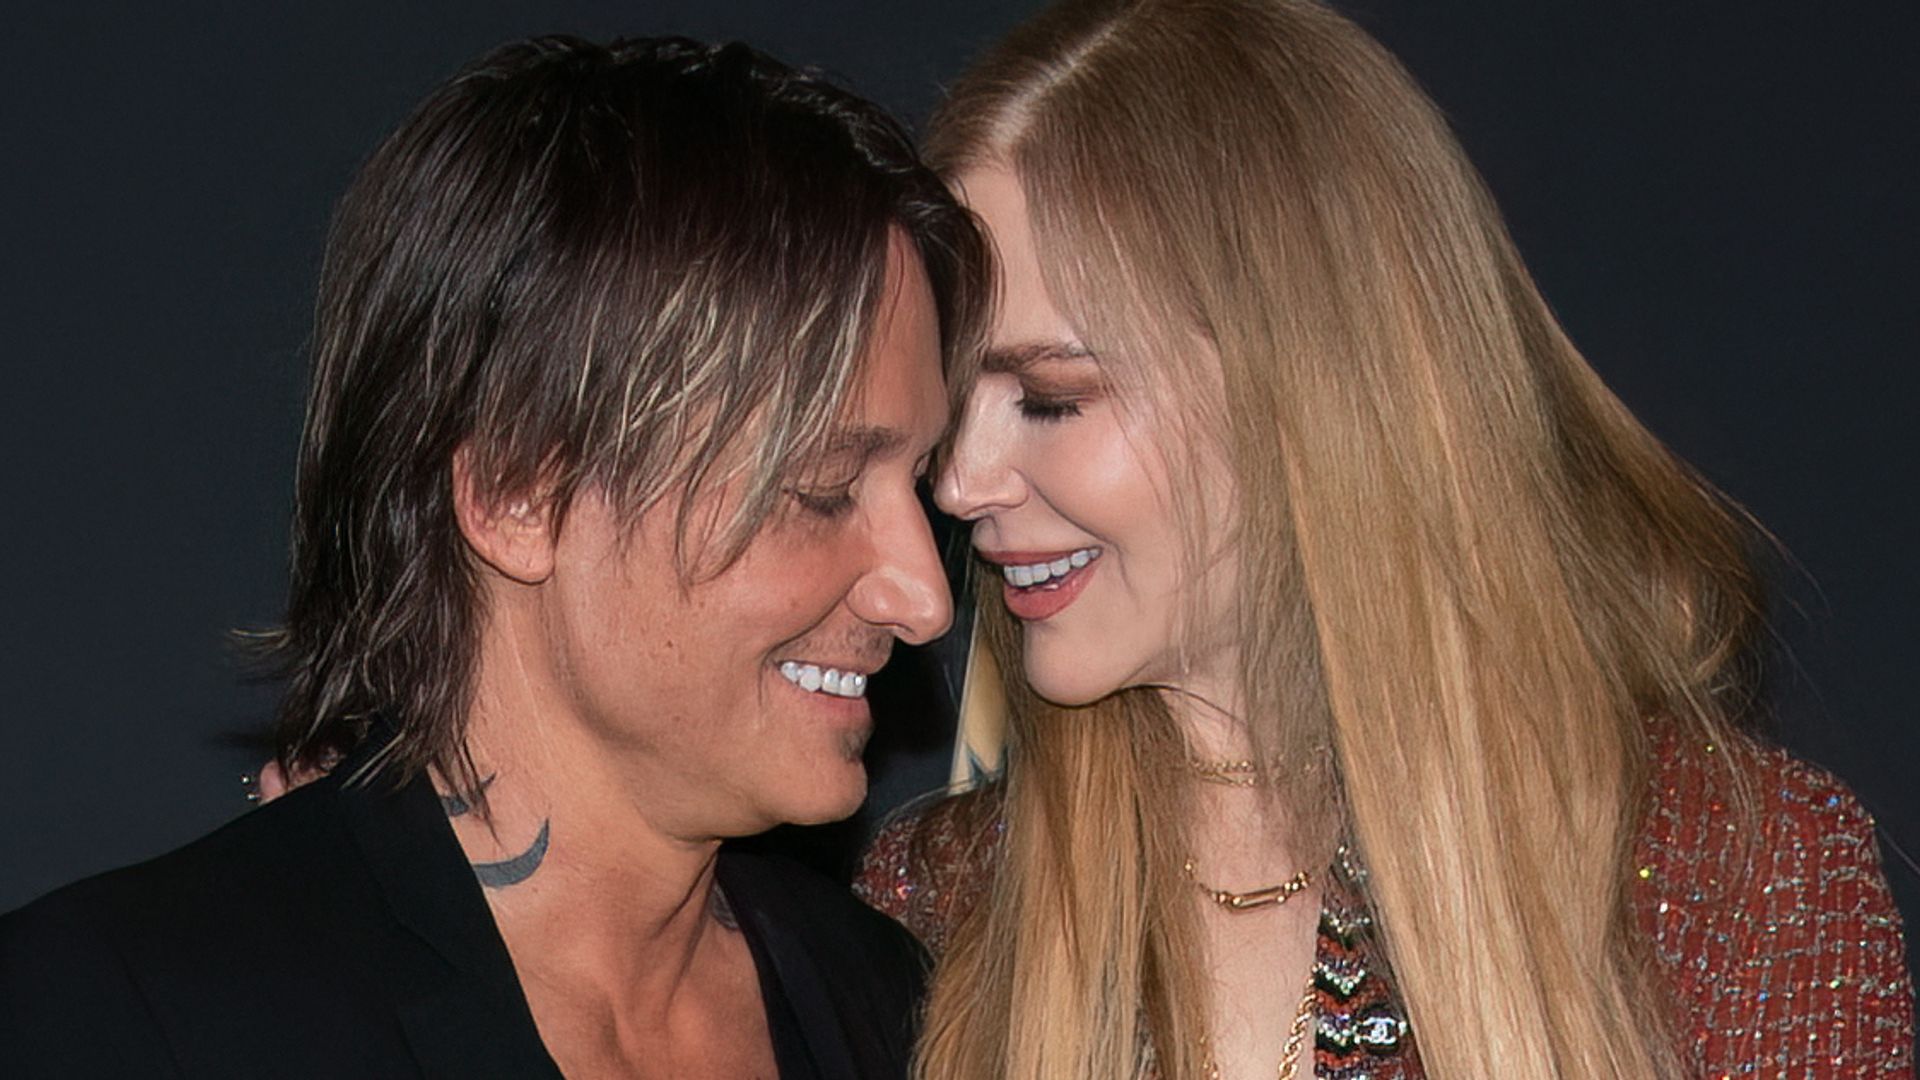 Nicole Kidman and Keith Urban are couple goals in 'hot' behind-the-scenes clip - watch